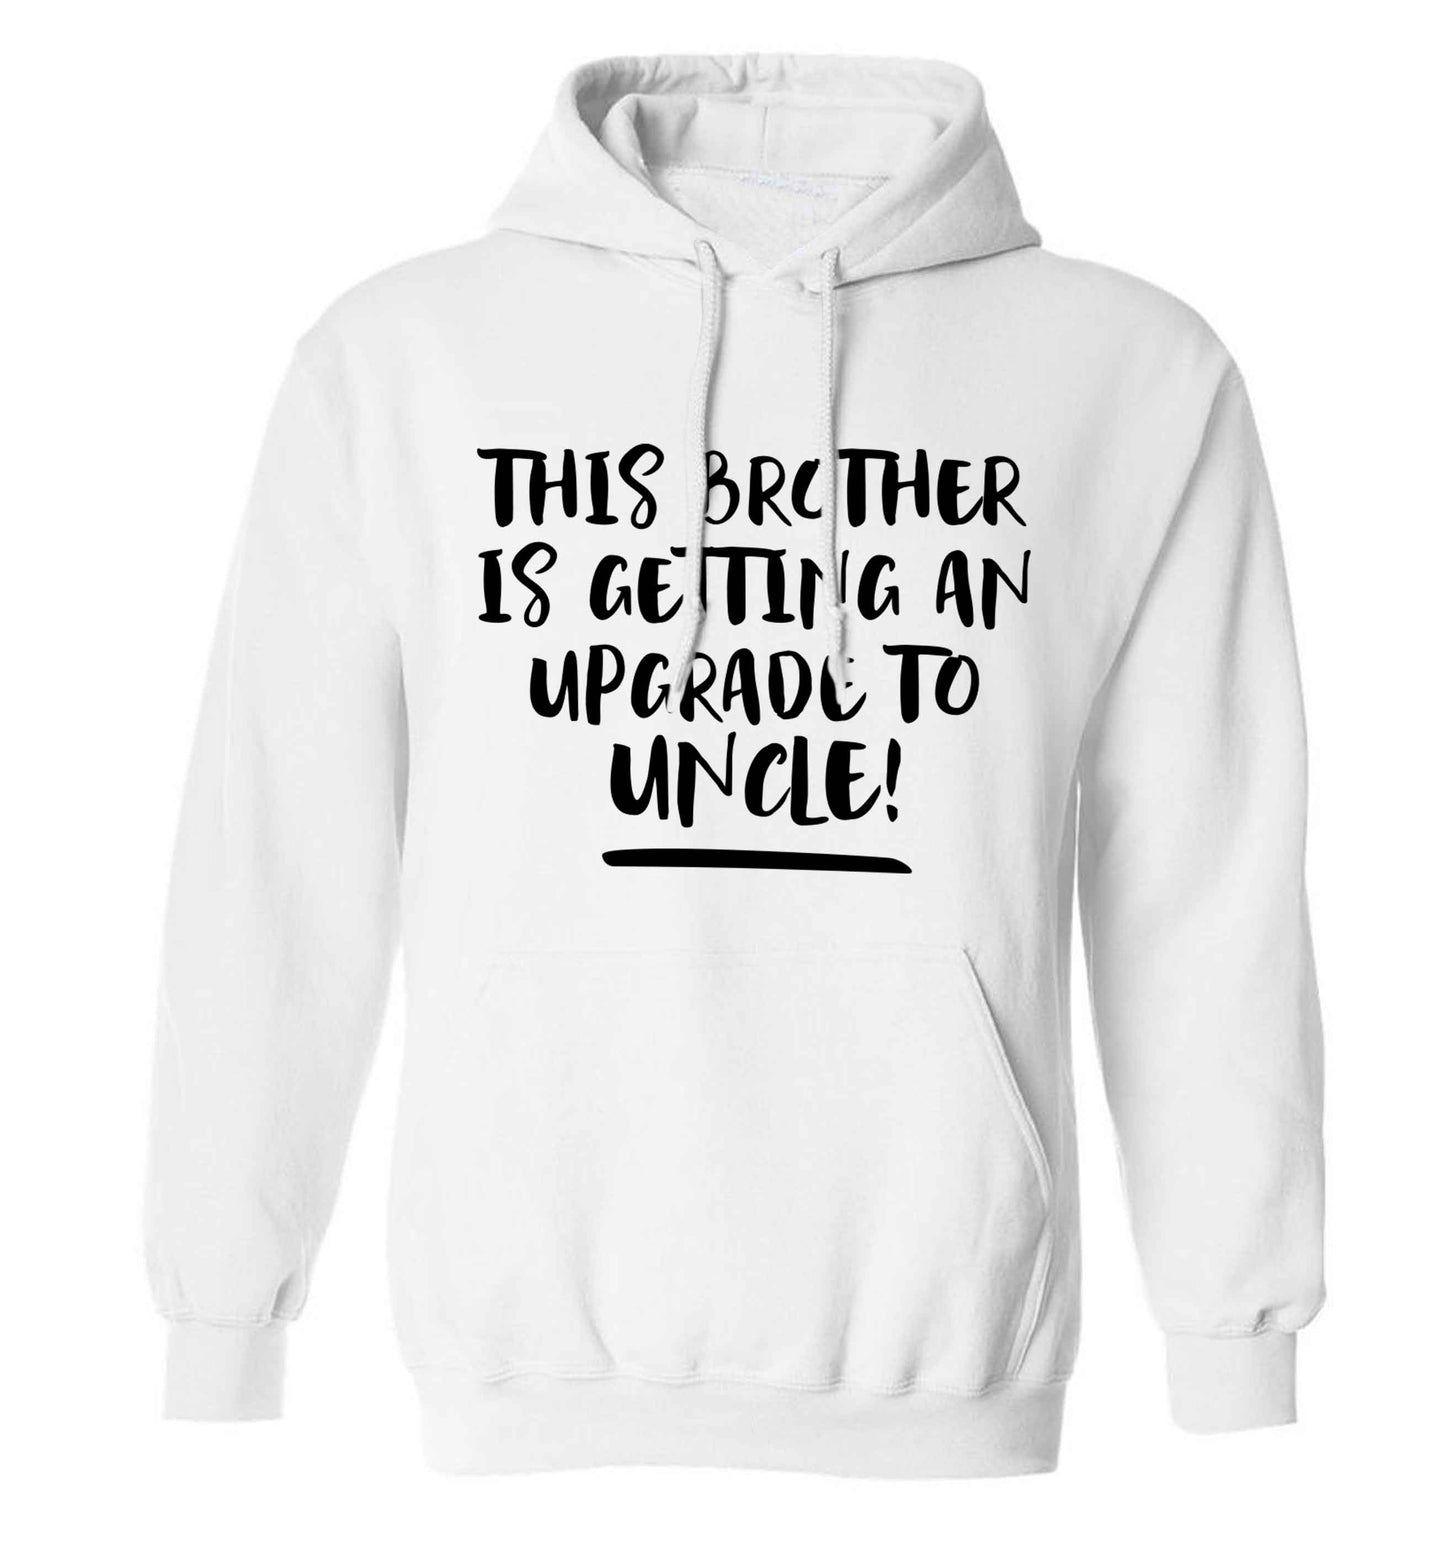 This brother is getting an upgrade to uncle! adults unisex white hoodie 2XL